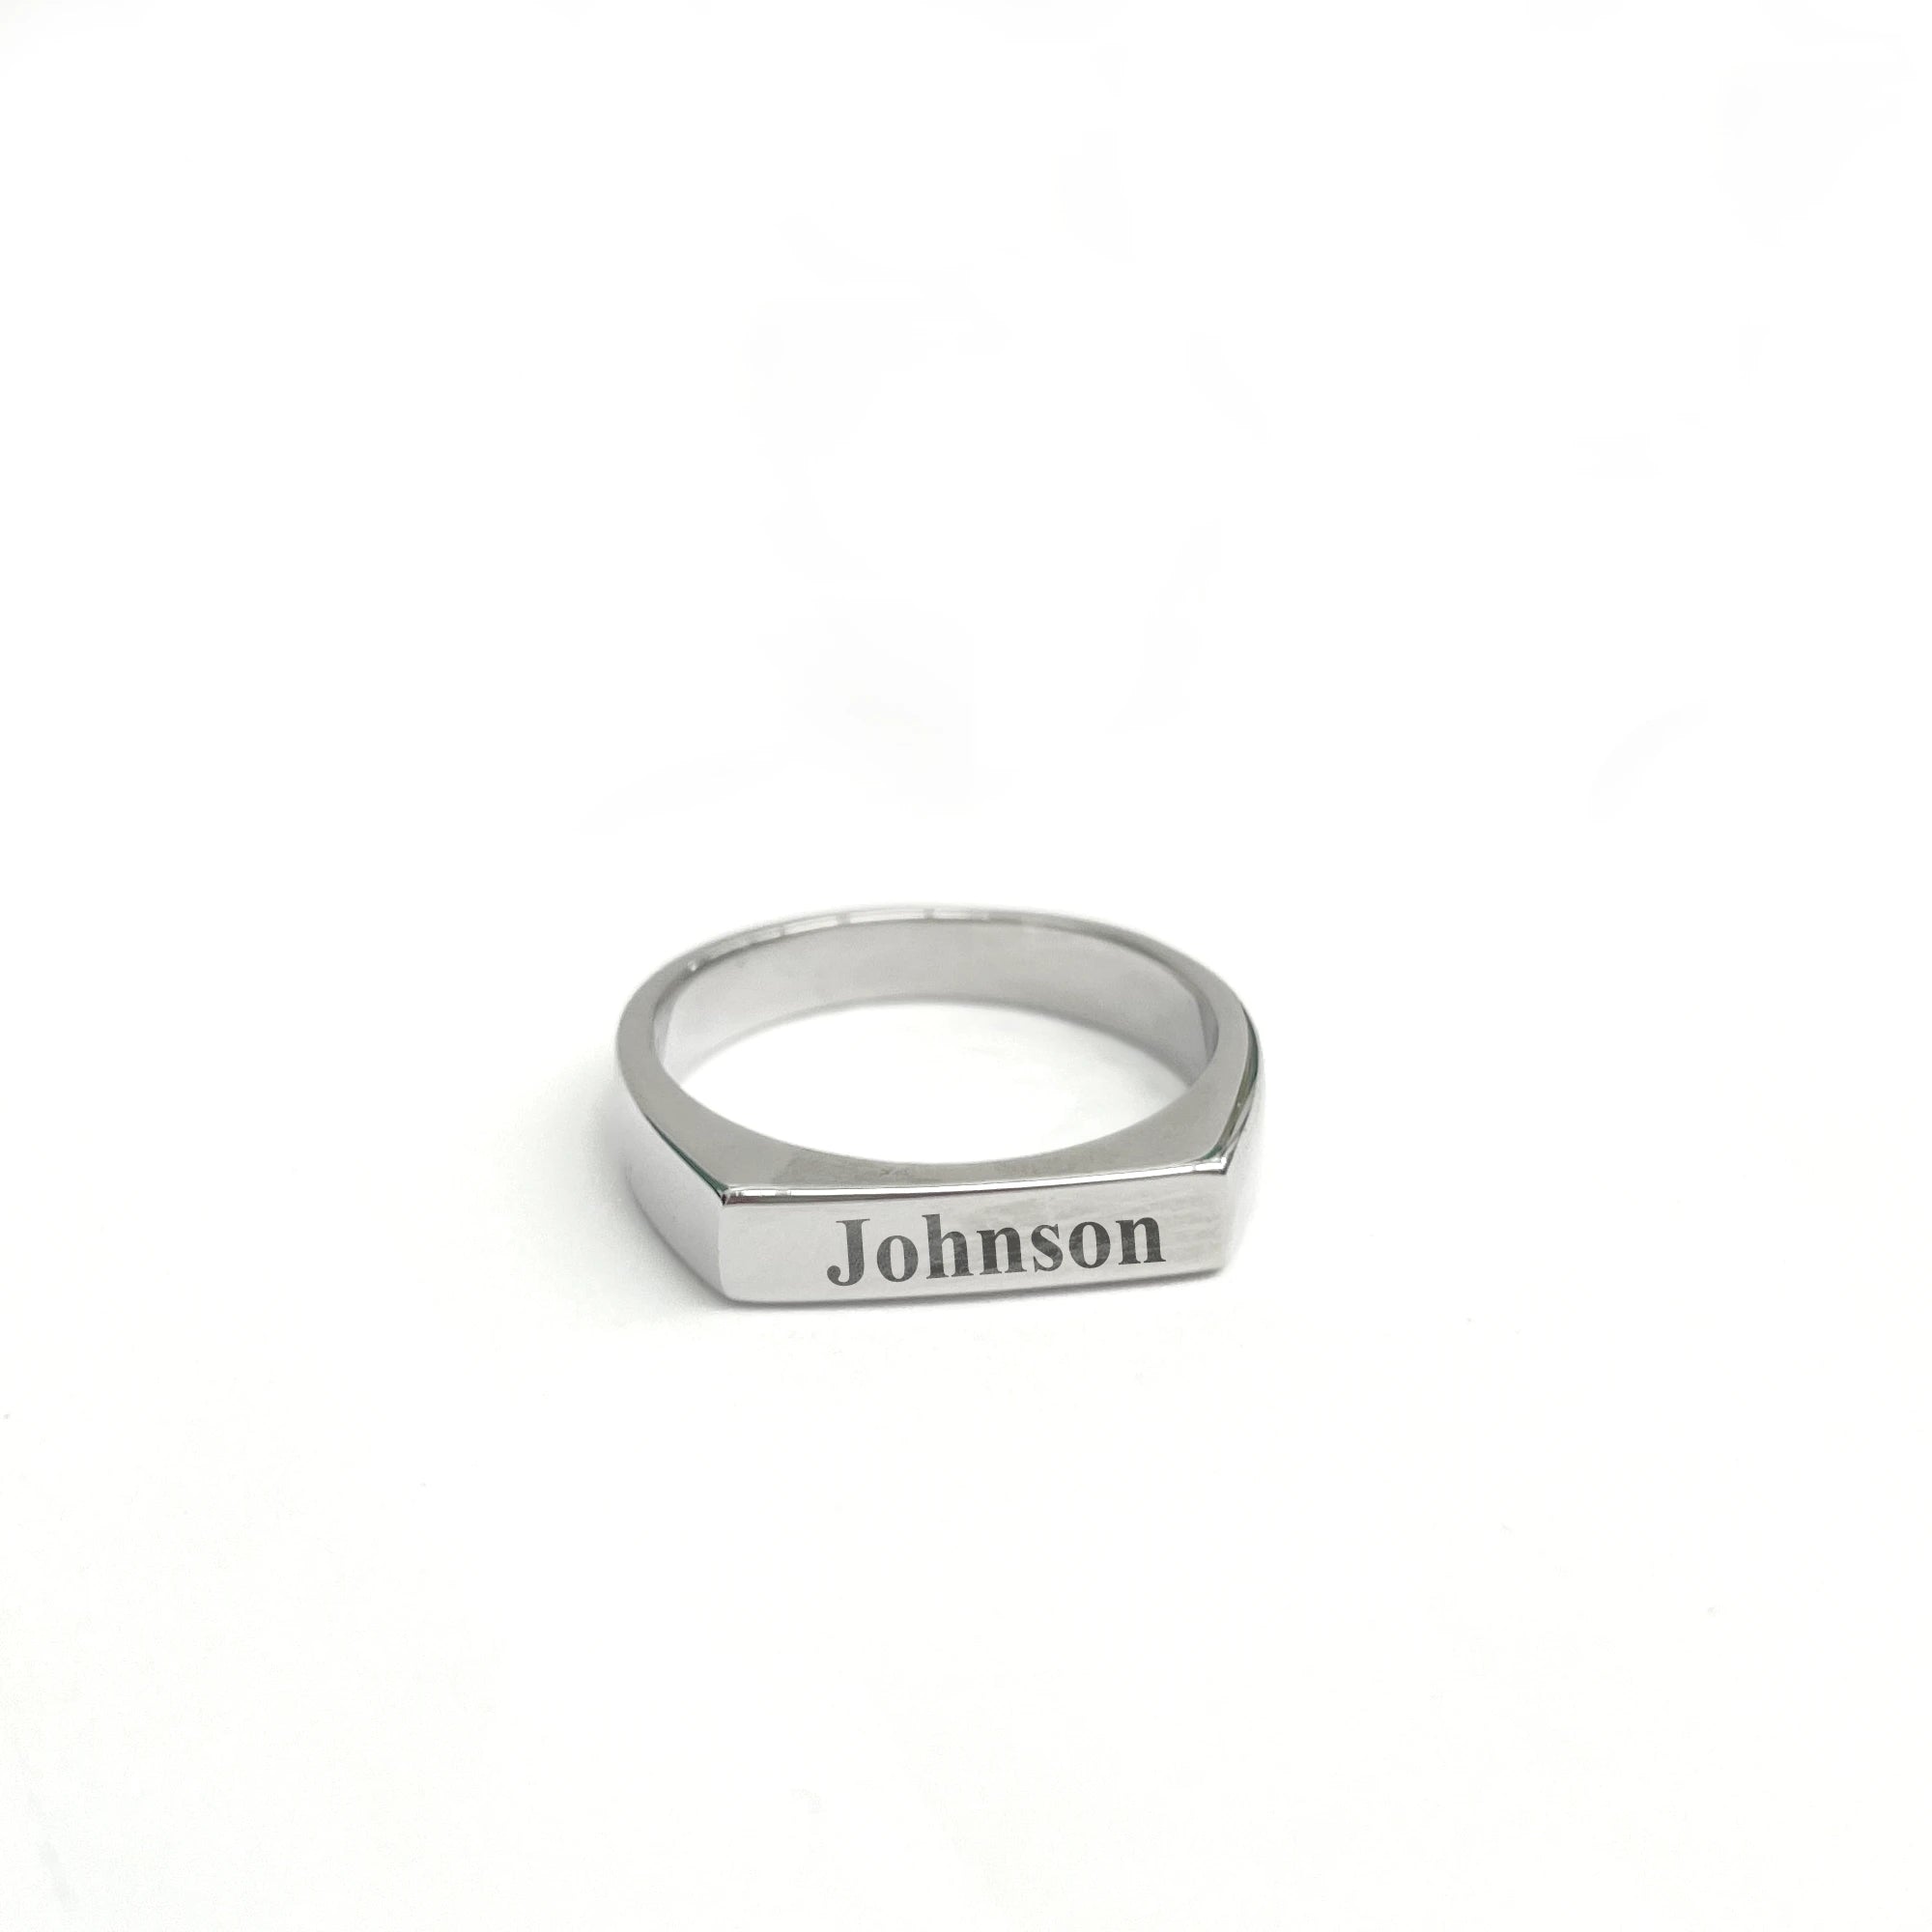 Engraved Name Initial Date handwriting Band Ring